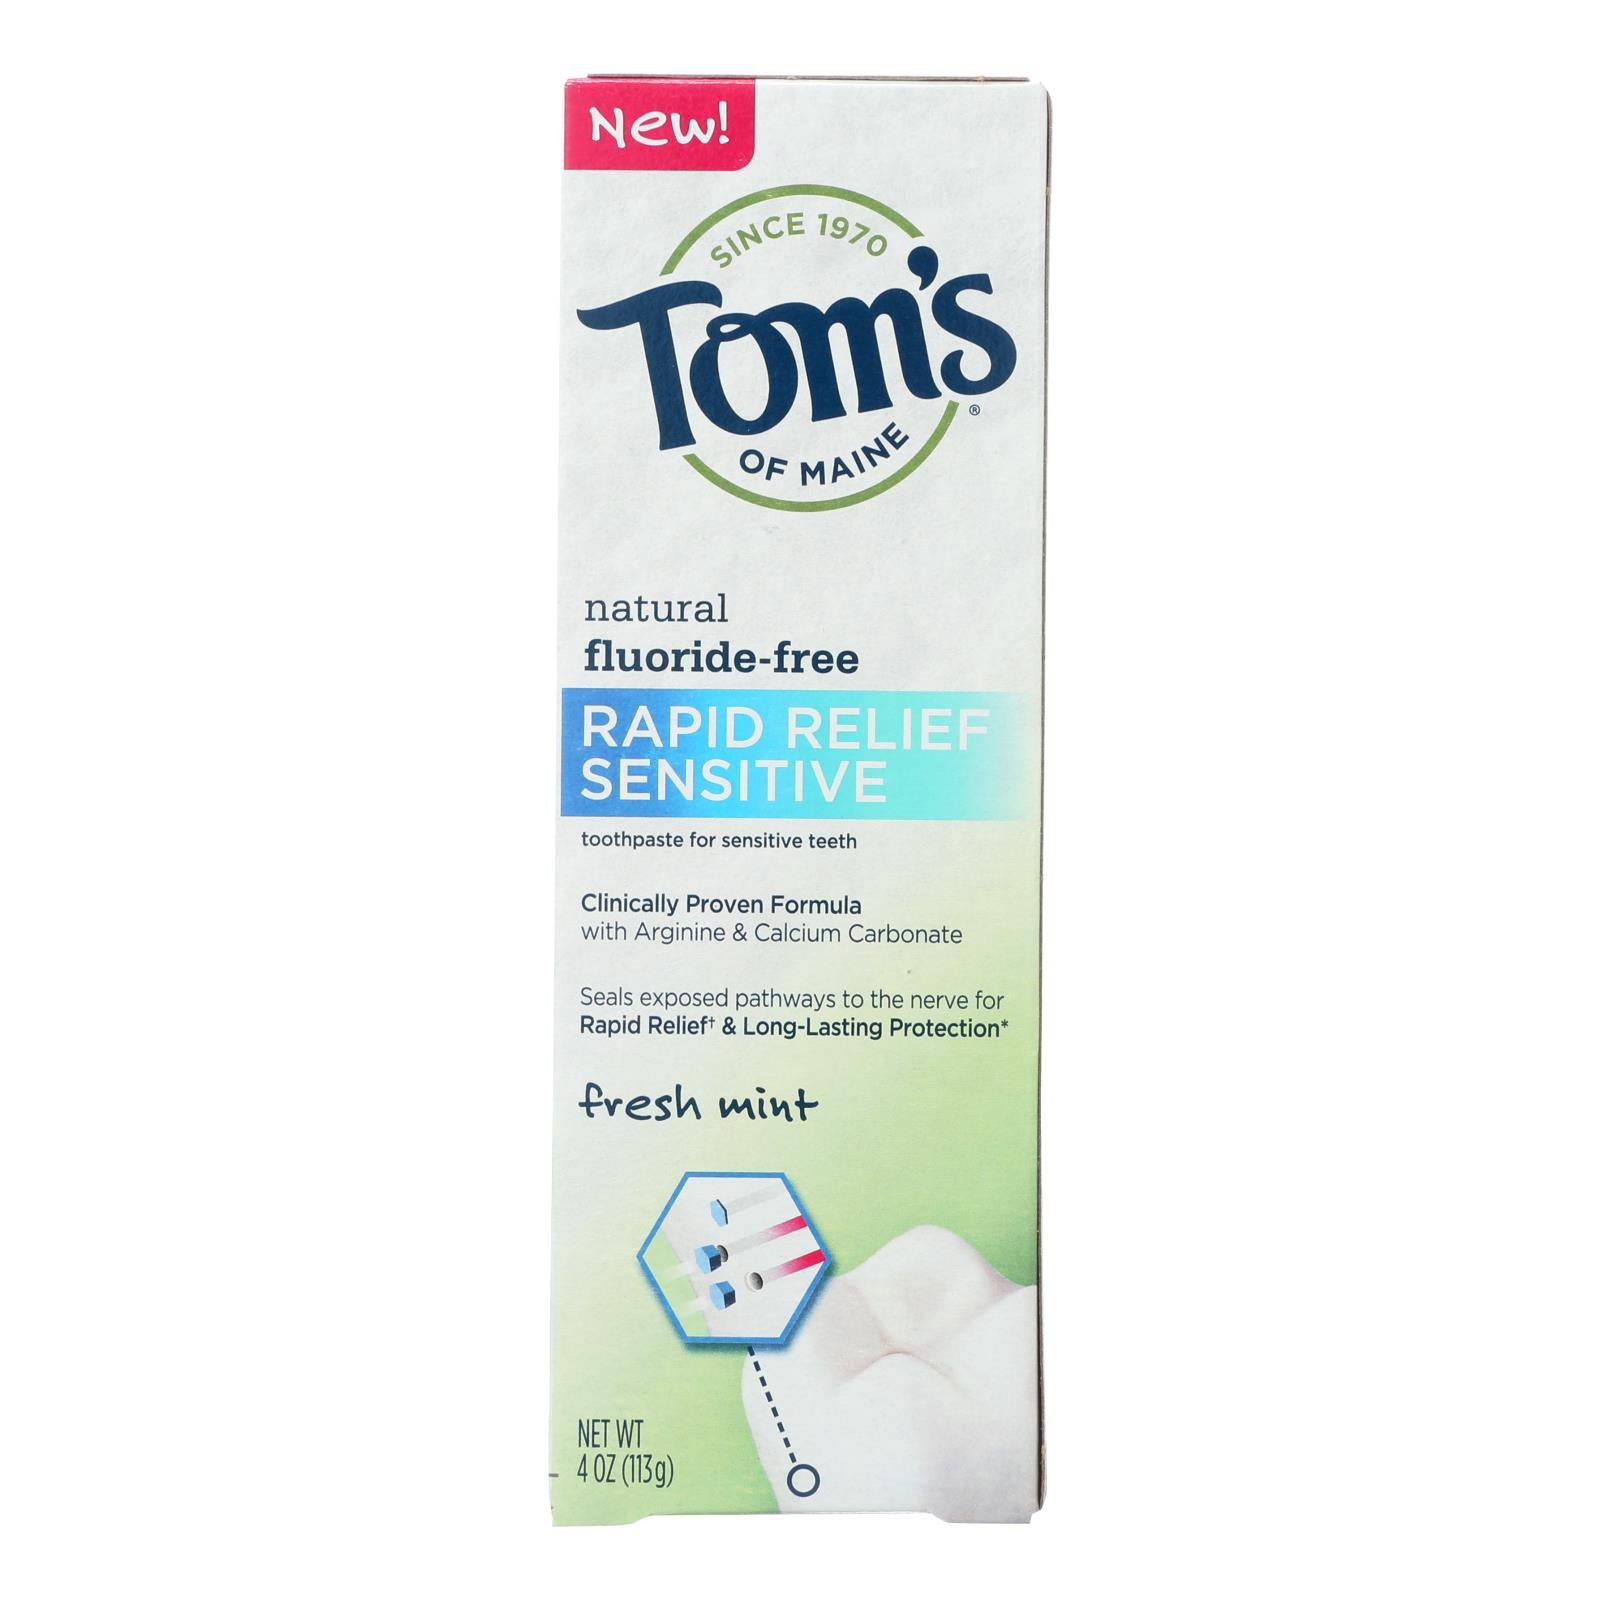 Tom's Of Maine Rapid Relief Sensitive Toothpaste - Fresh Mint Fluoride-free - Case Of 6 - 4 Oz. | OnlyNaturals.us